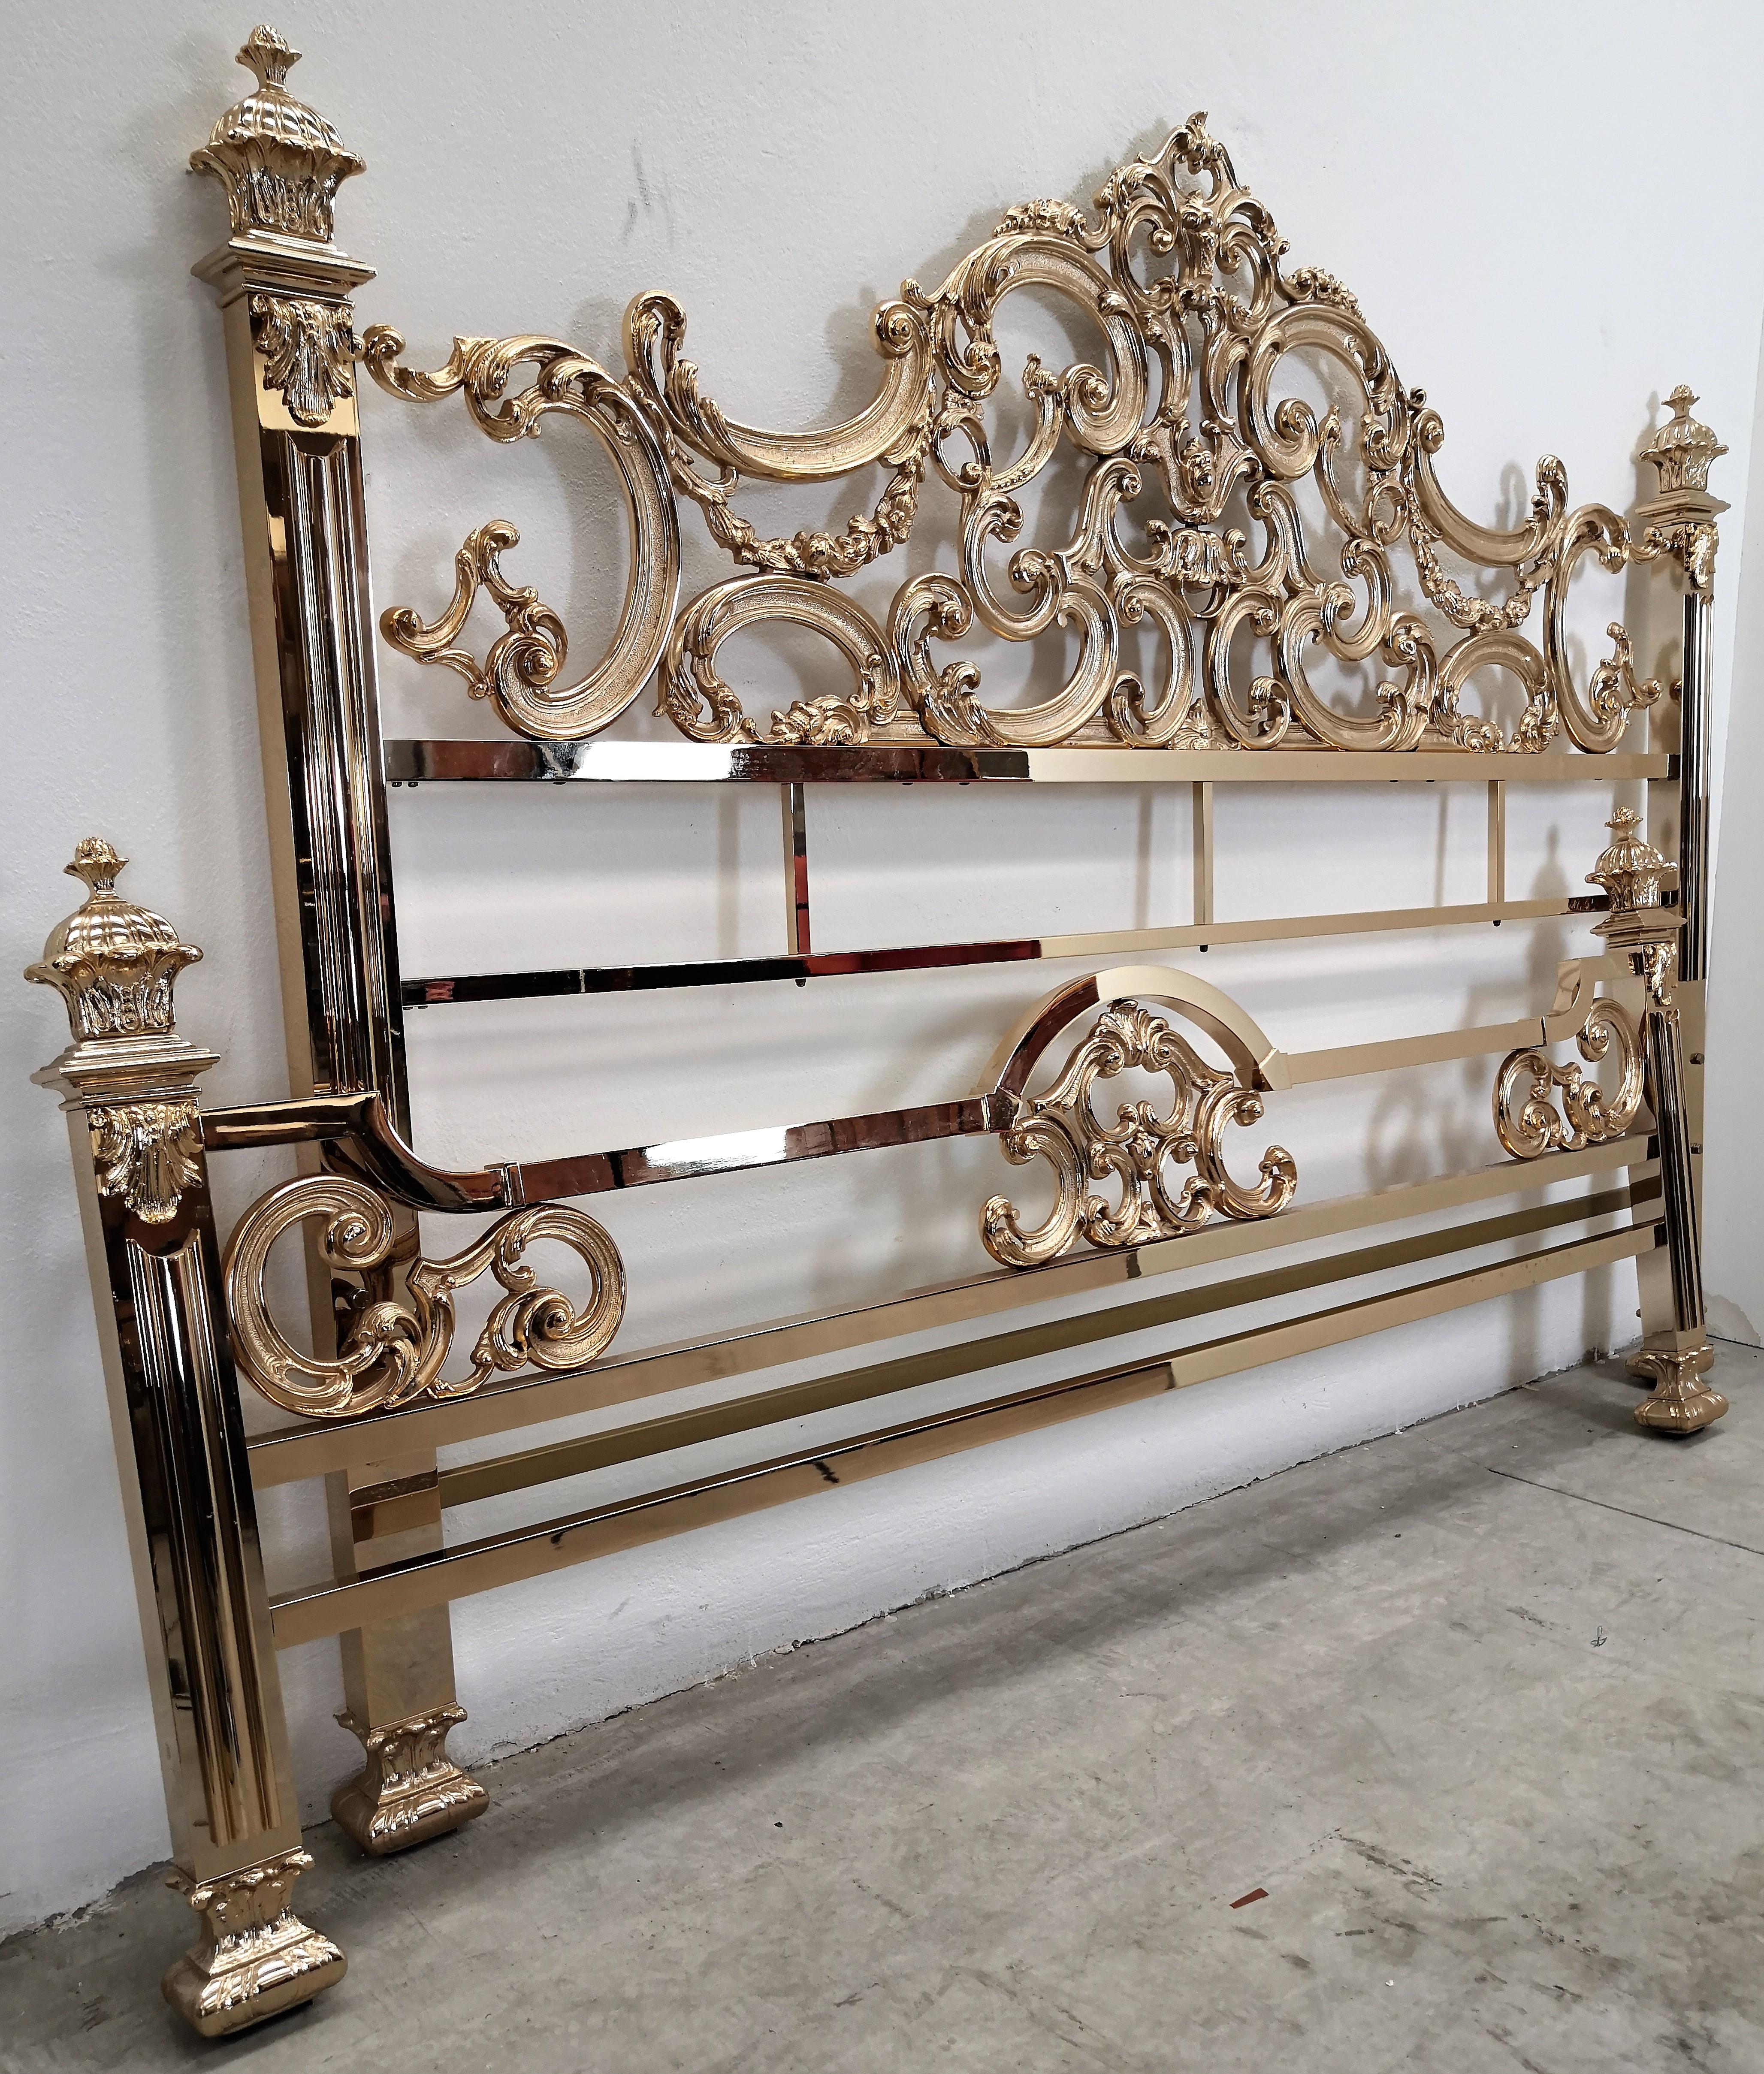 Beautiful and stylish Italian geometric and Baroque shiny brass king size bed frame, 1970s. A great piece that perfectly adds to every home decor the typical glitz, glamour, and gold of Hollywood Regency style, with a nod to Art Deco decadence and